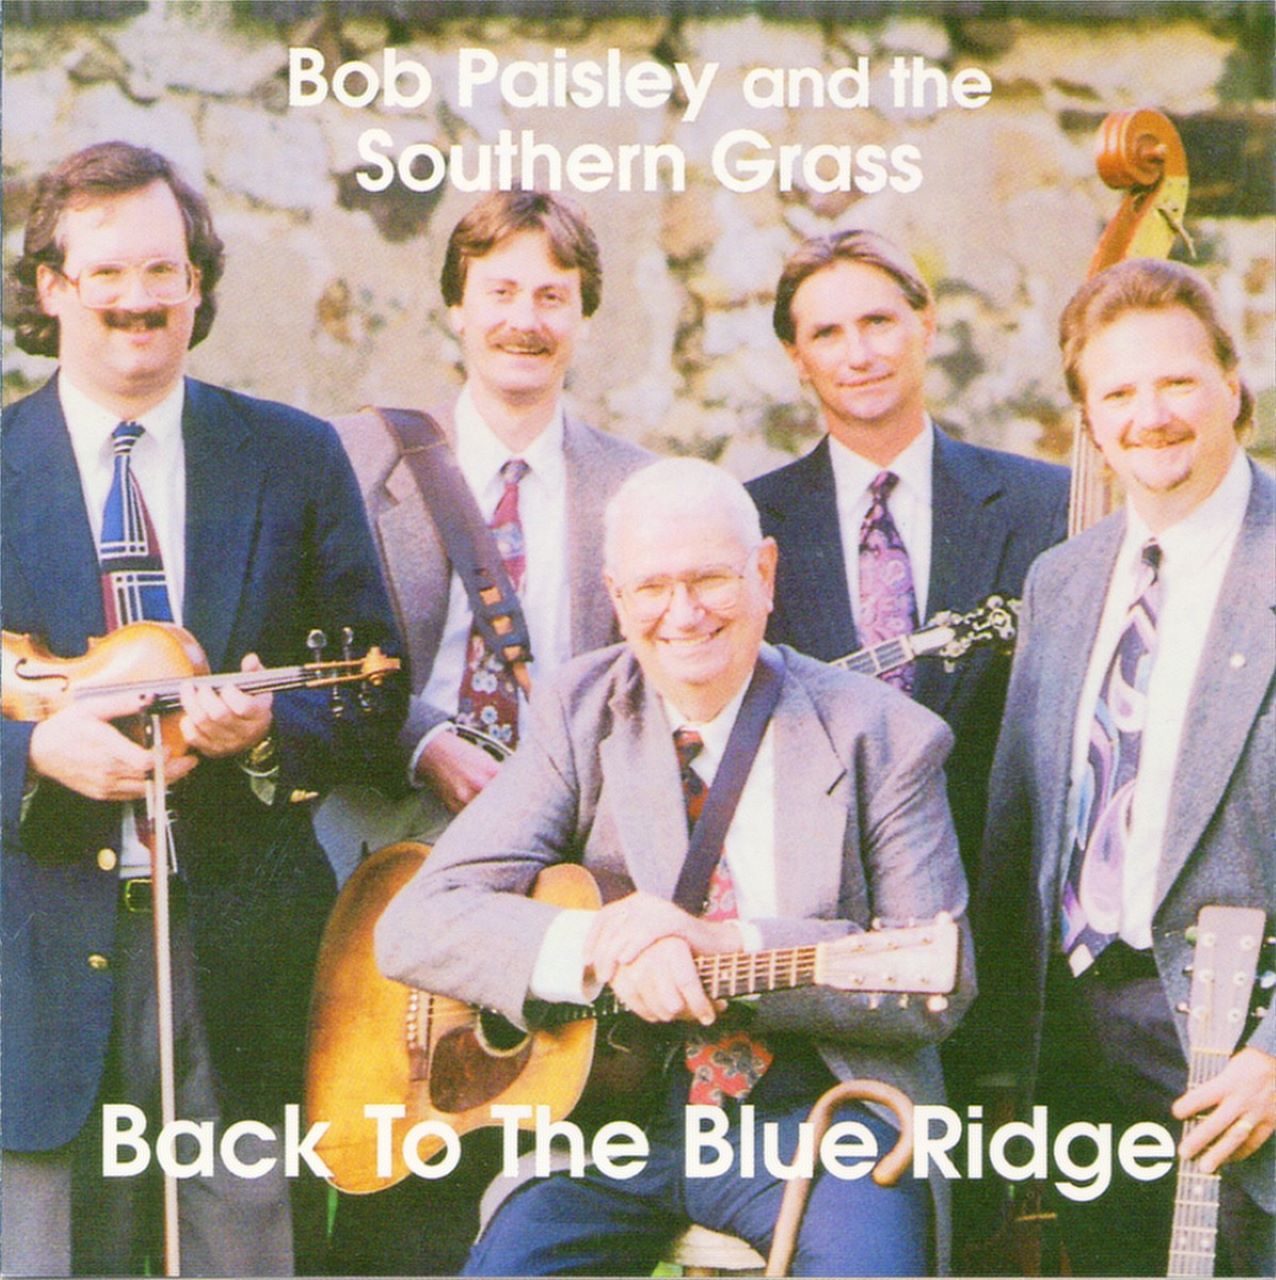 Bob Paisley And The Southern Grass – Back To The Blue Ridge cover album